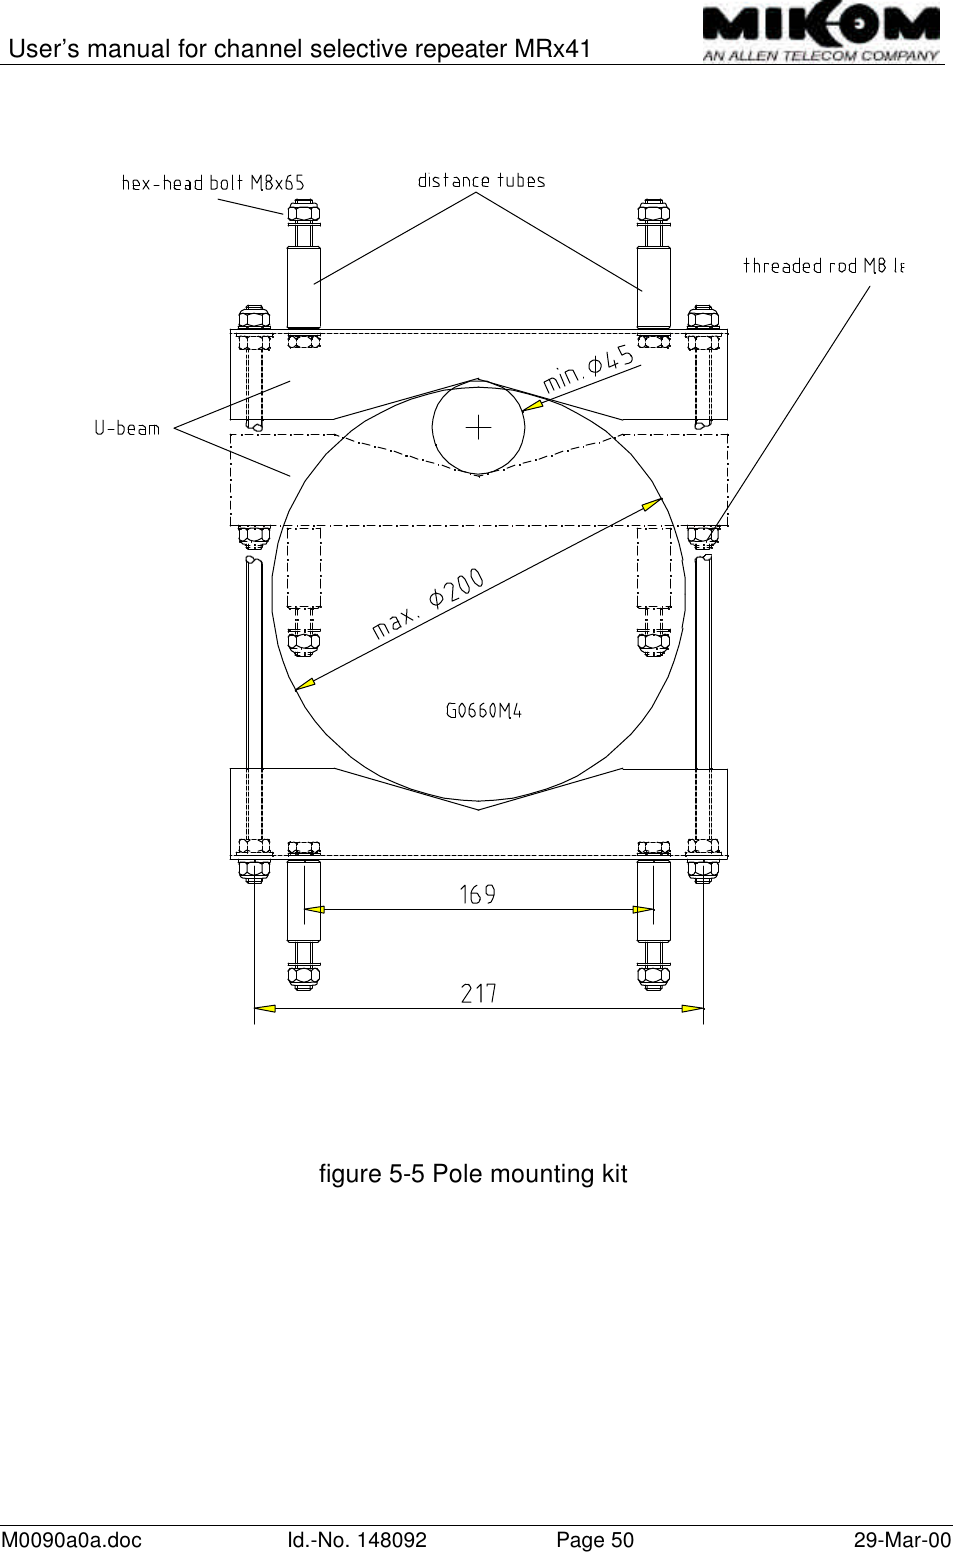 User’s manual for channel selective repeater MRx41M0090a0a.doc Id.-No. 148092 Page 50 29-Mar-00figure 5-5 Pole mounting kit